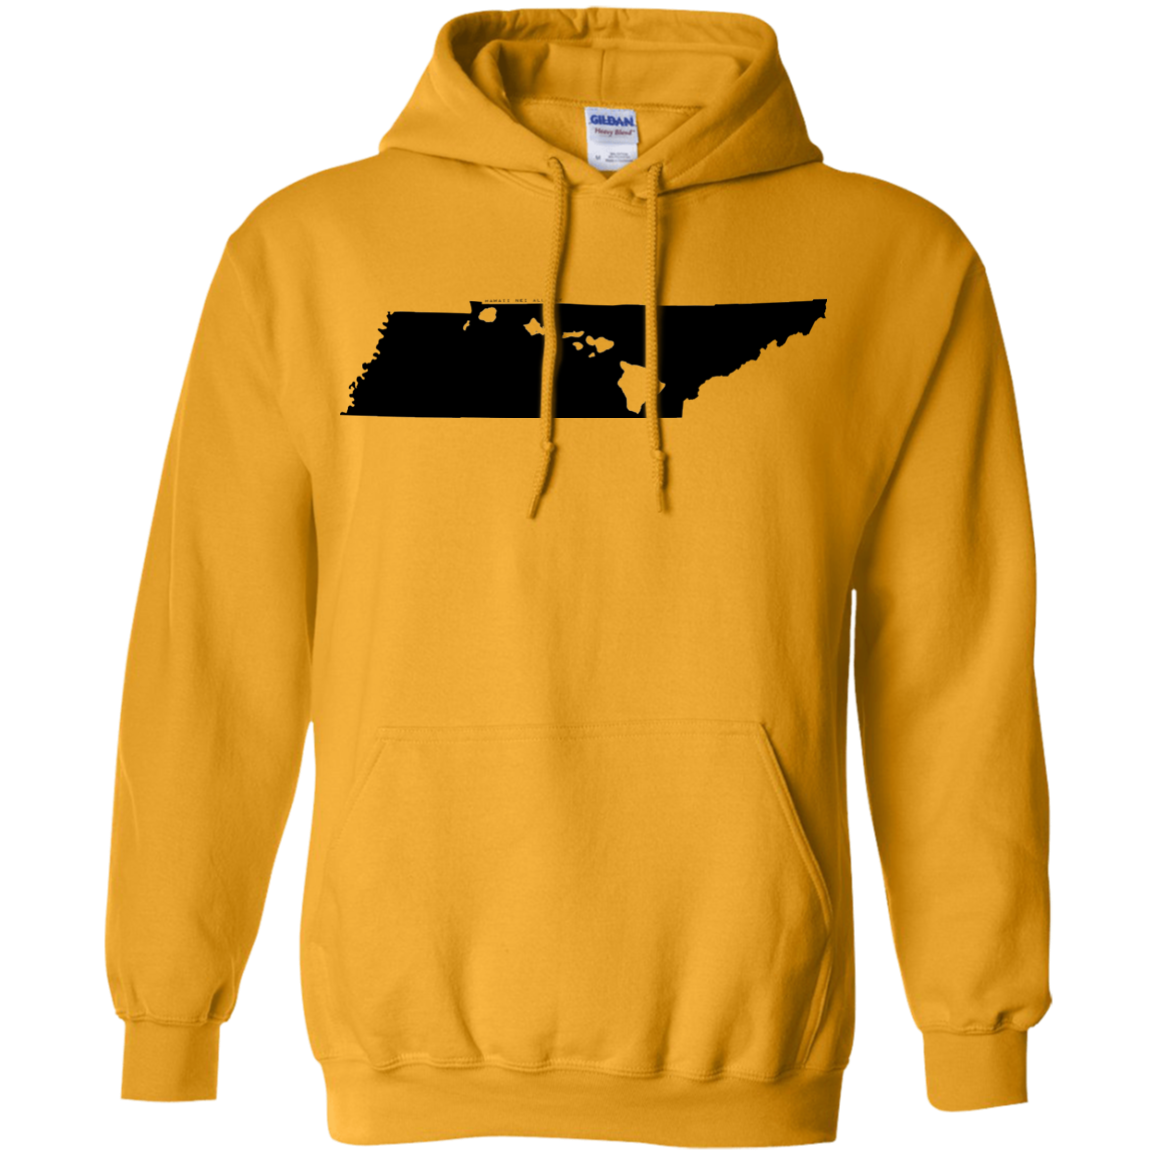 Living in Tennessee with Hawaii Roots Pullover Hoodie 8 oz., Sweatshirts, Hawaii Nei All Day